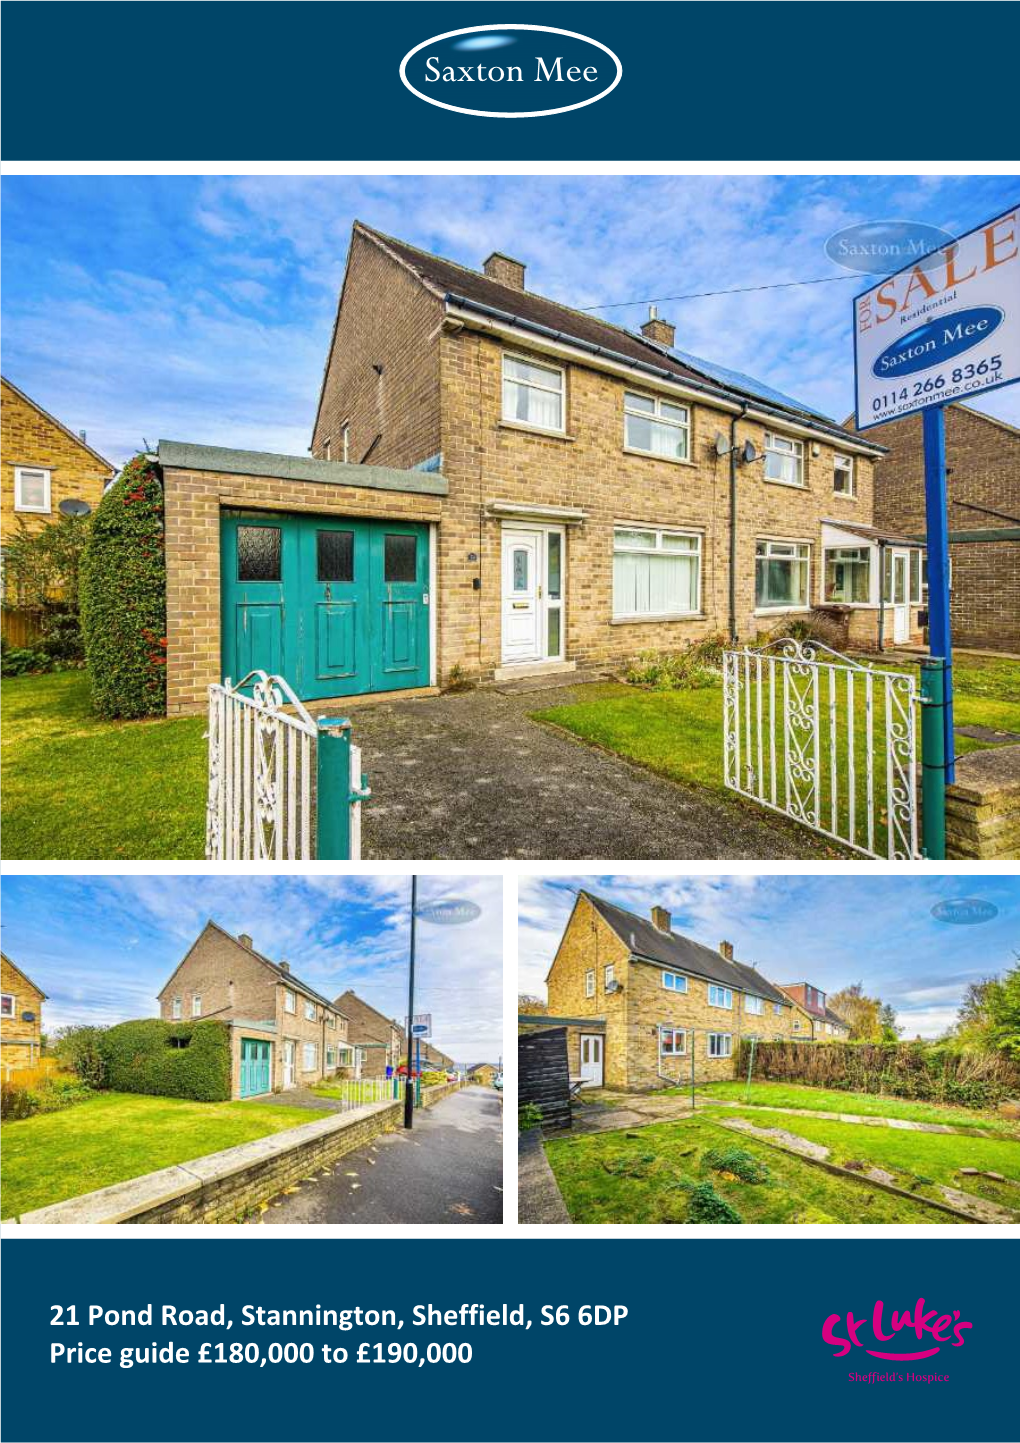 21 Pond Road, Stannington, Sheffield, S6 6DP Price Guide £180,000 to £190,000 She Ield’S Hospice 21 Pond Road Stannington Price Guide £180,000 to £190,000